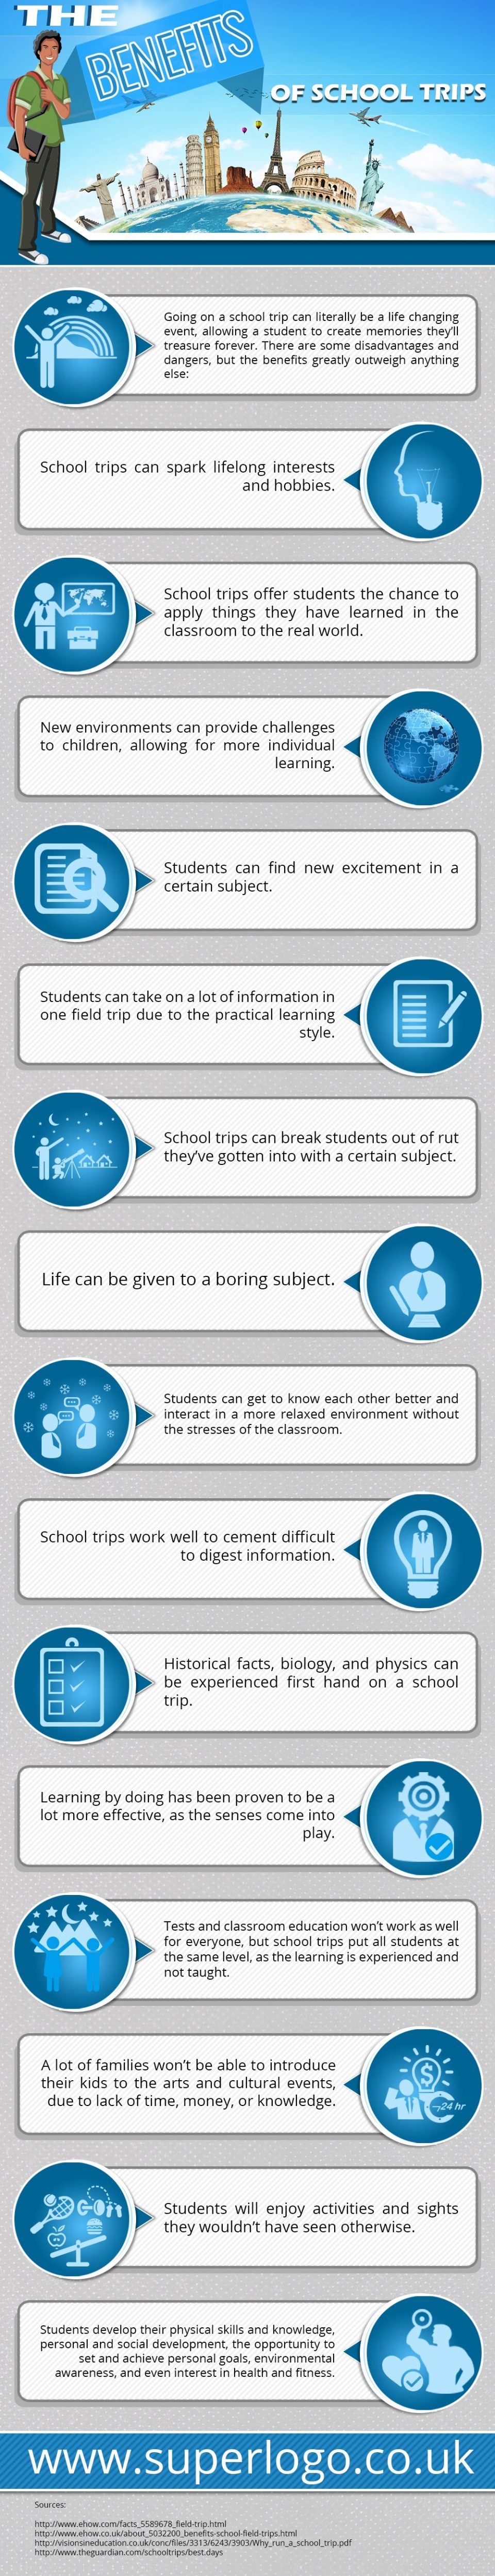 The Benefits of School Trips Infographic